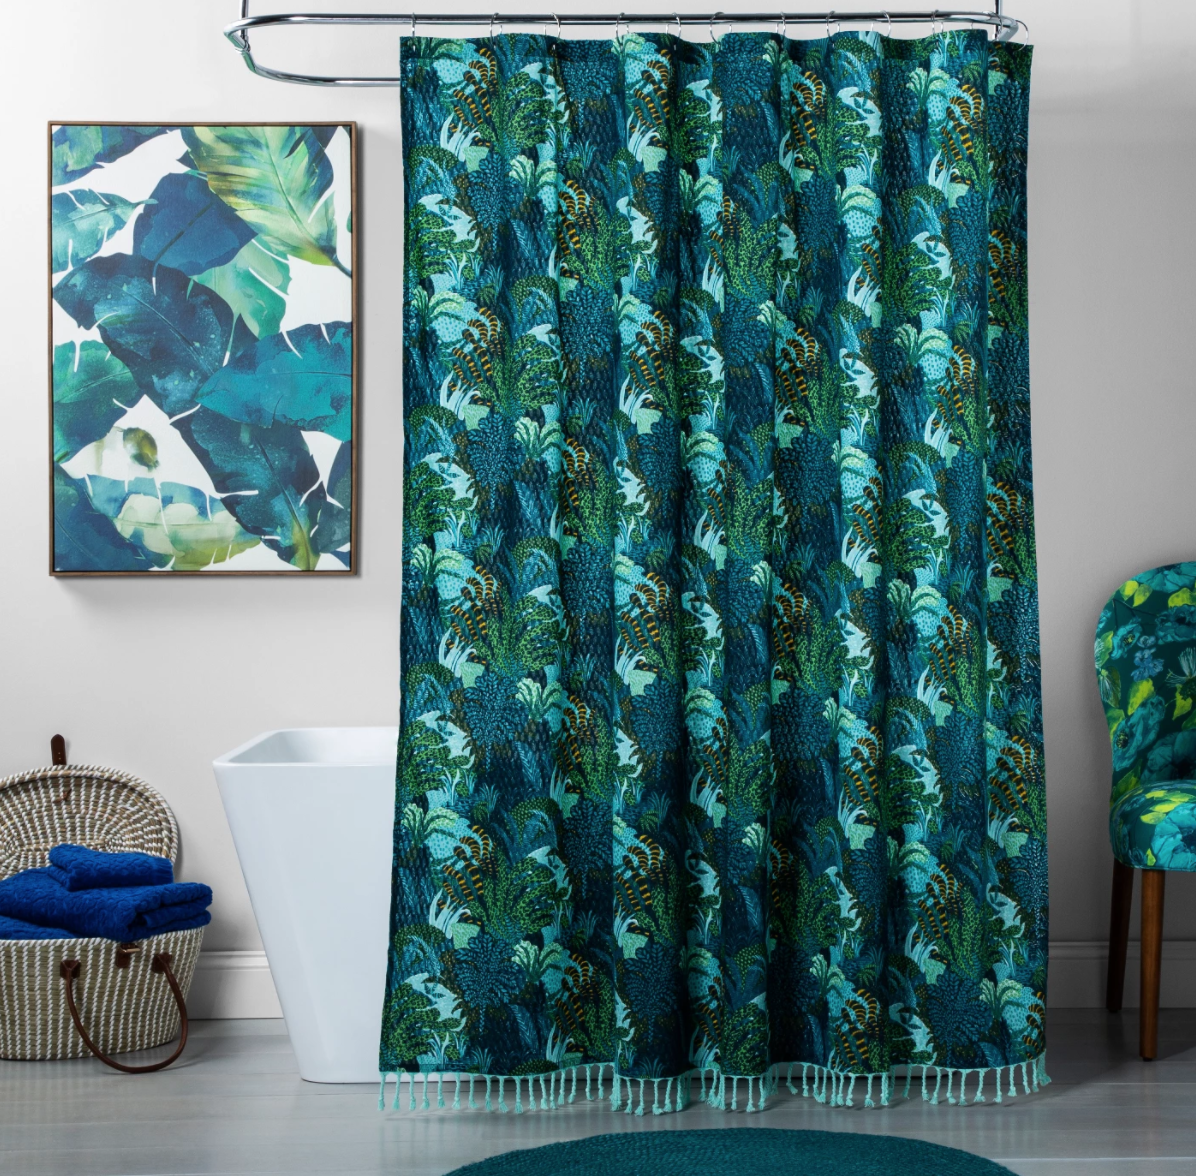 16 Best Shower Curtains to Buy in 2020 